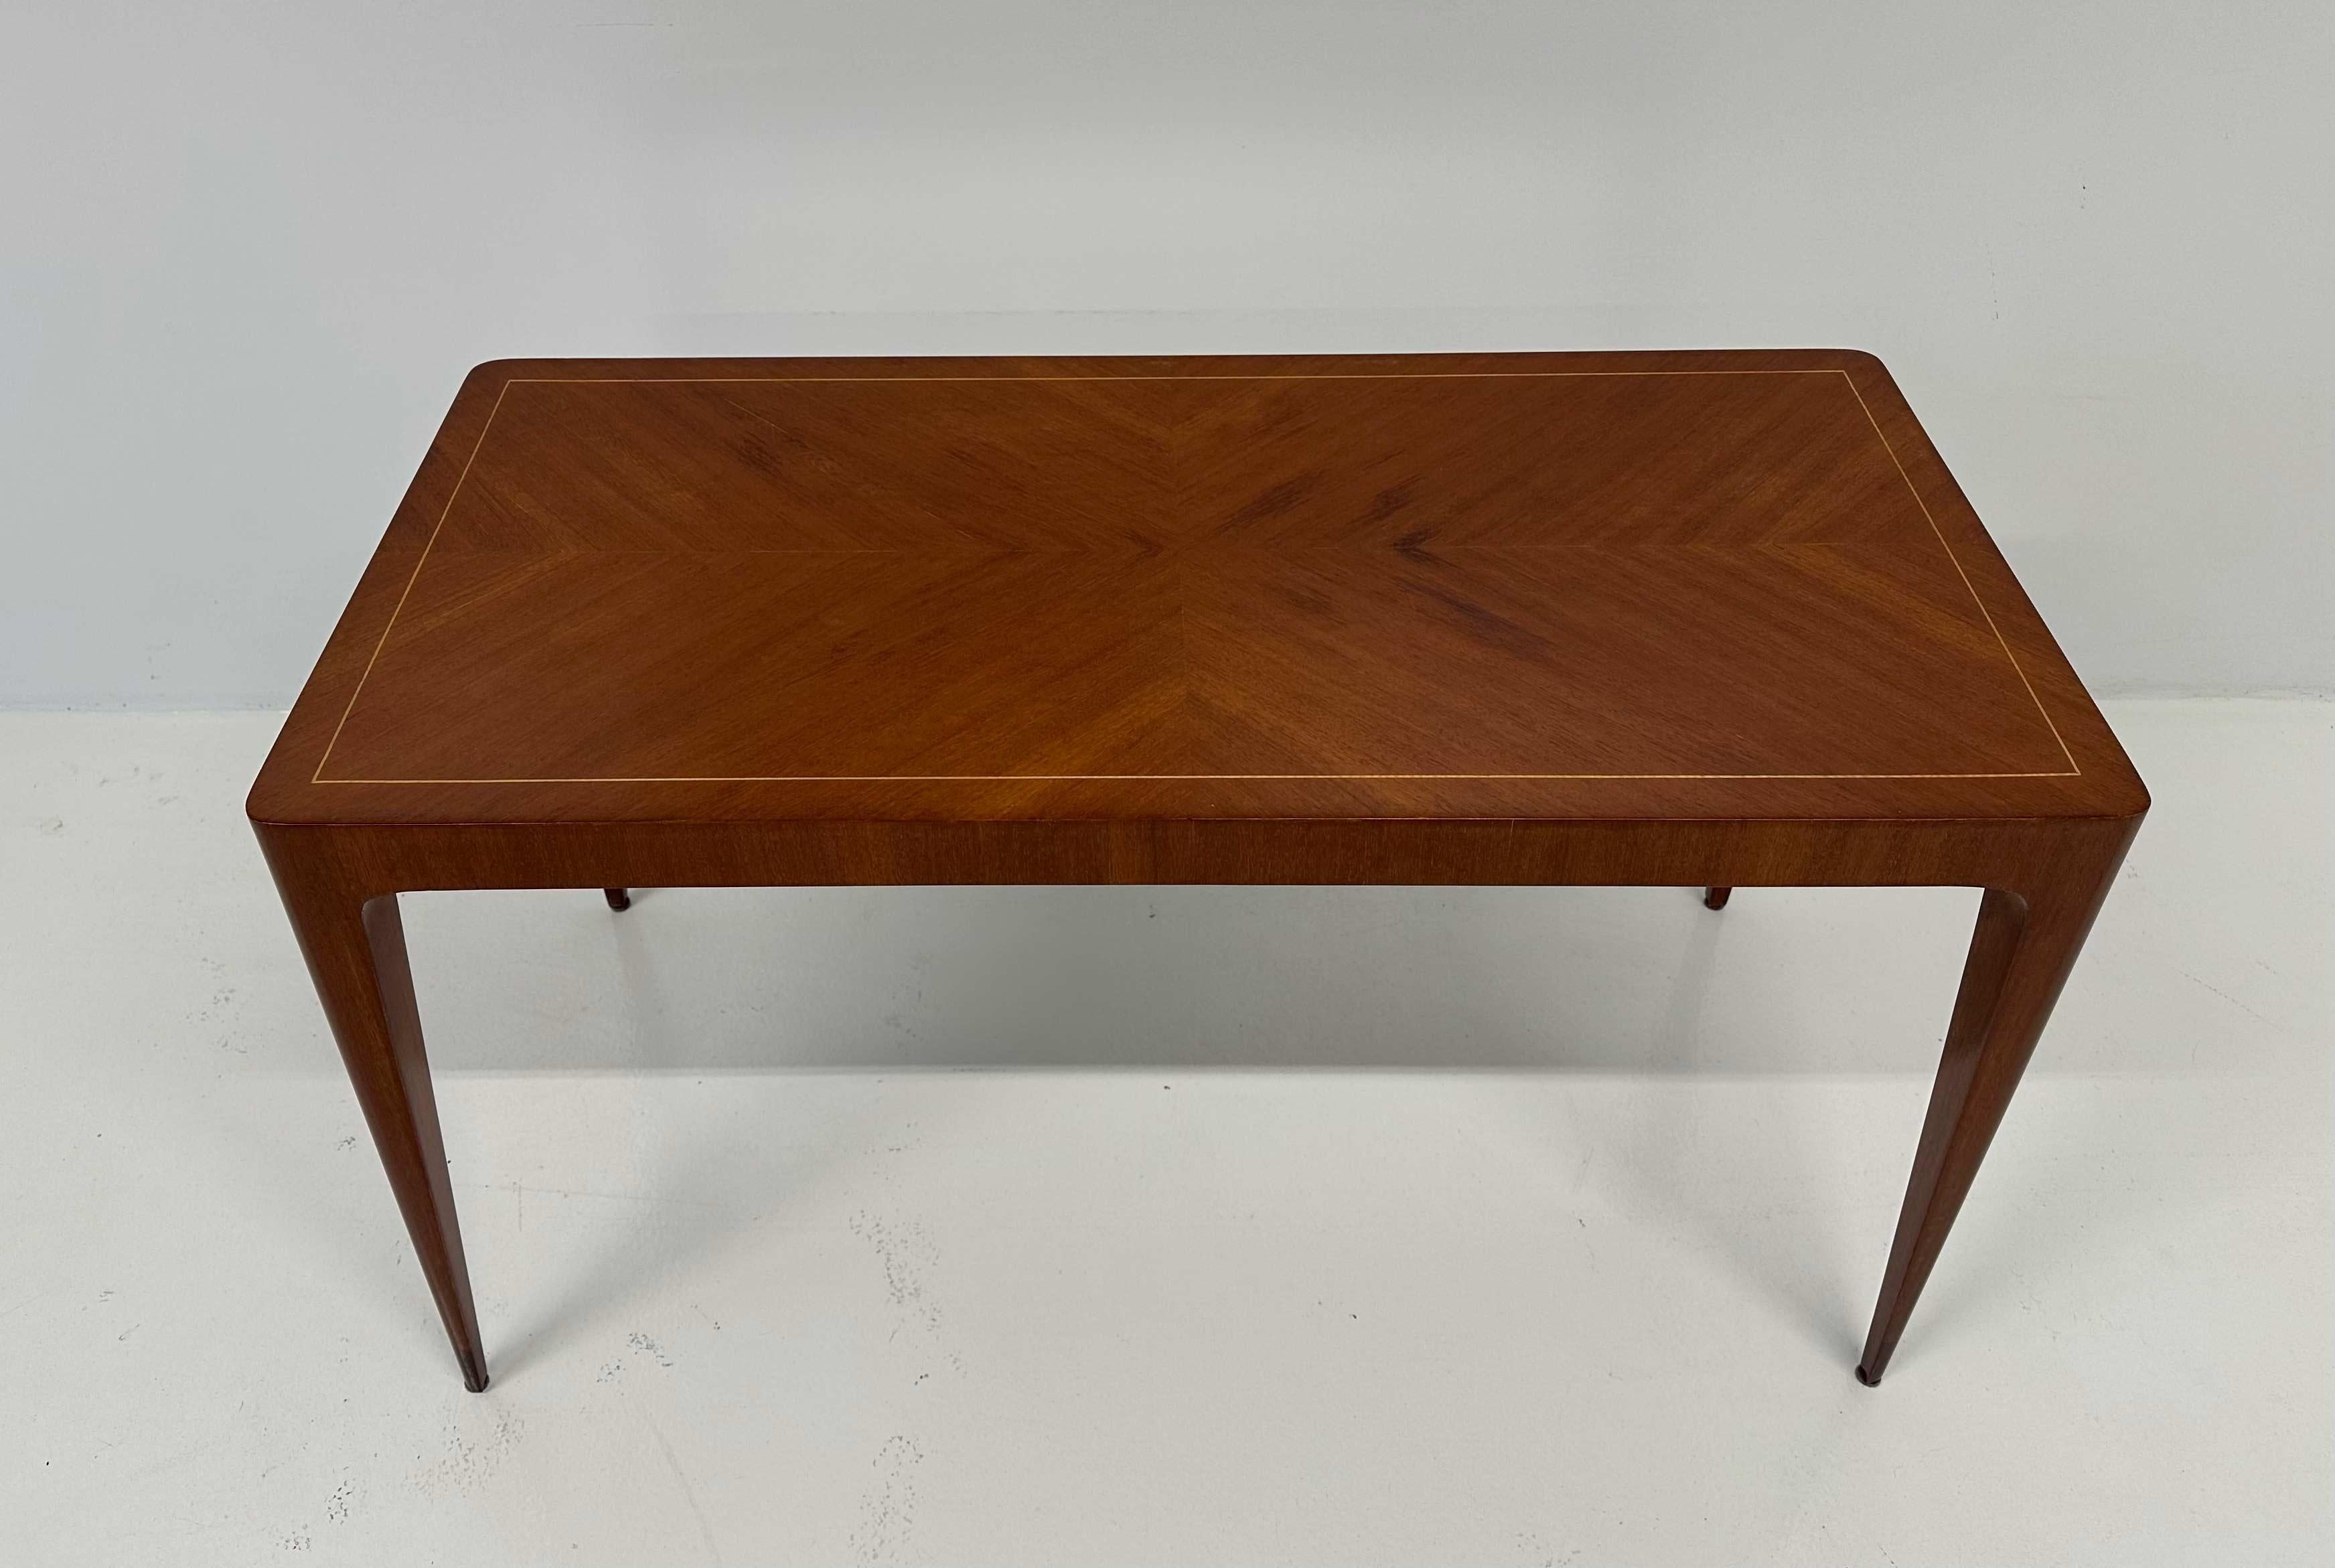 Mid-20th Century Italian Art Deco Teak and Maple Coffee Table By Paolo Buffa , 1950s For Sale